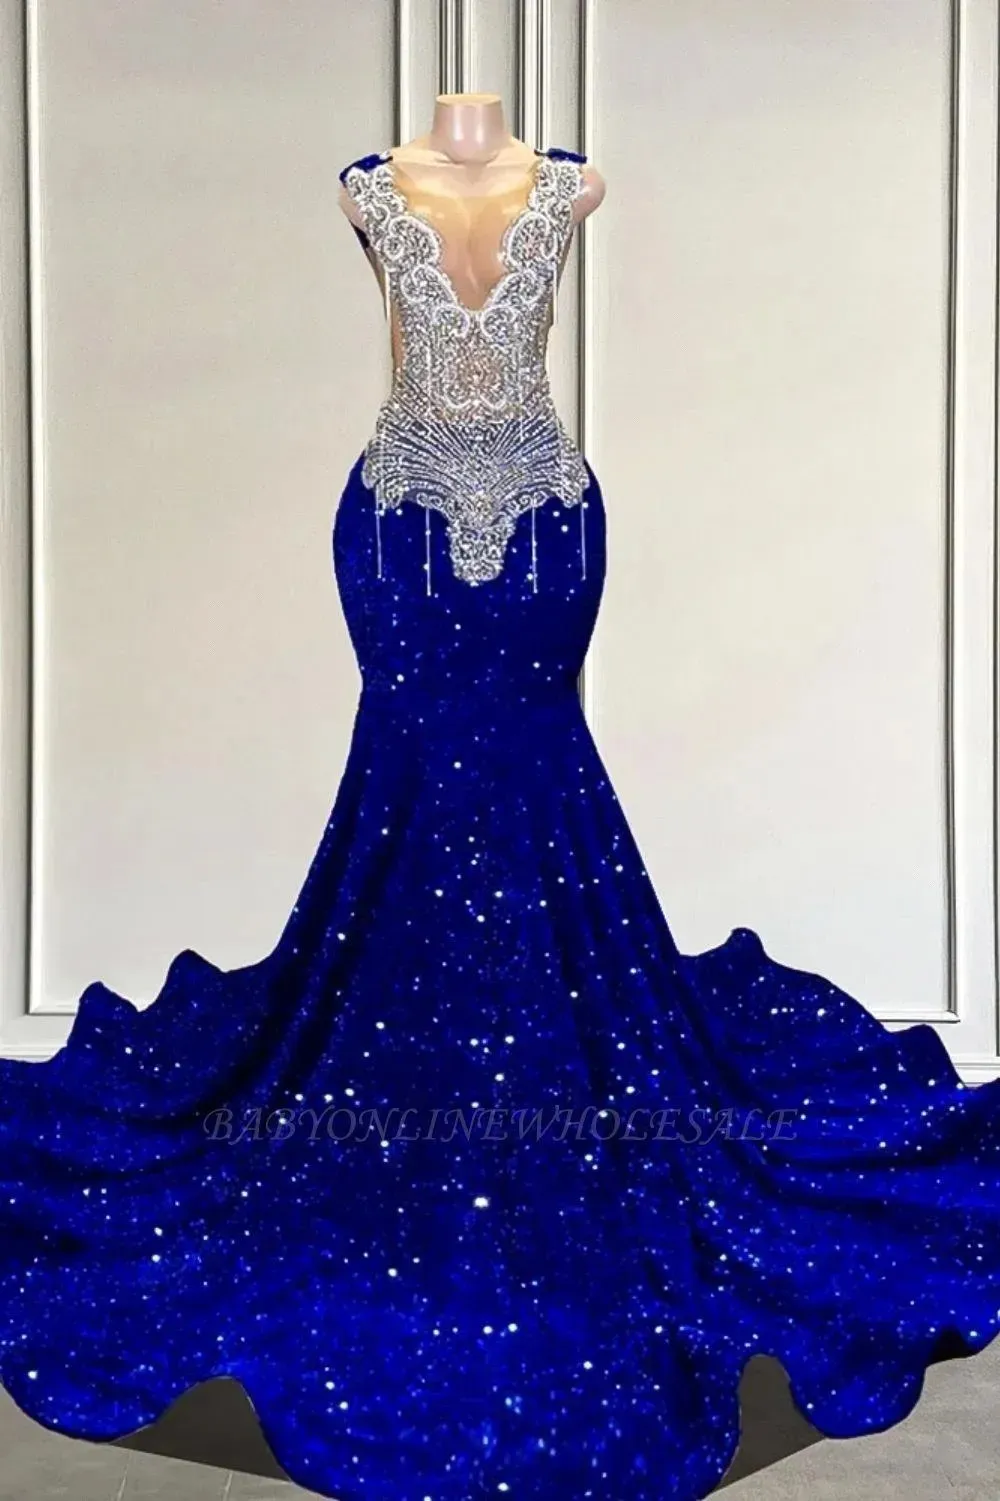 Sexy Royal Blue Mermaid Prom Dresses Bling Sequins Beadings Crystals Sheer Deep V Neck Evening Gowns Formal vestidos For Black Girls Graduation Party Custom BC18189